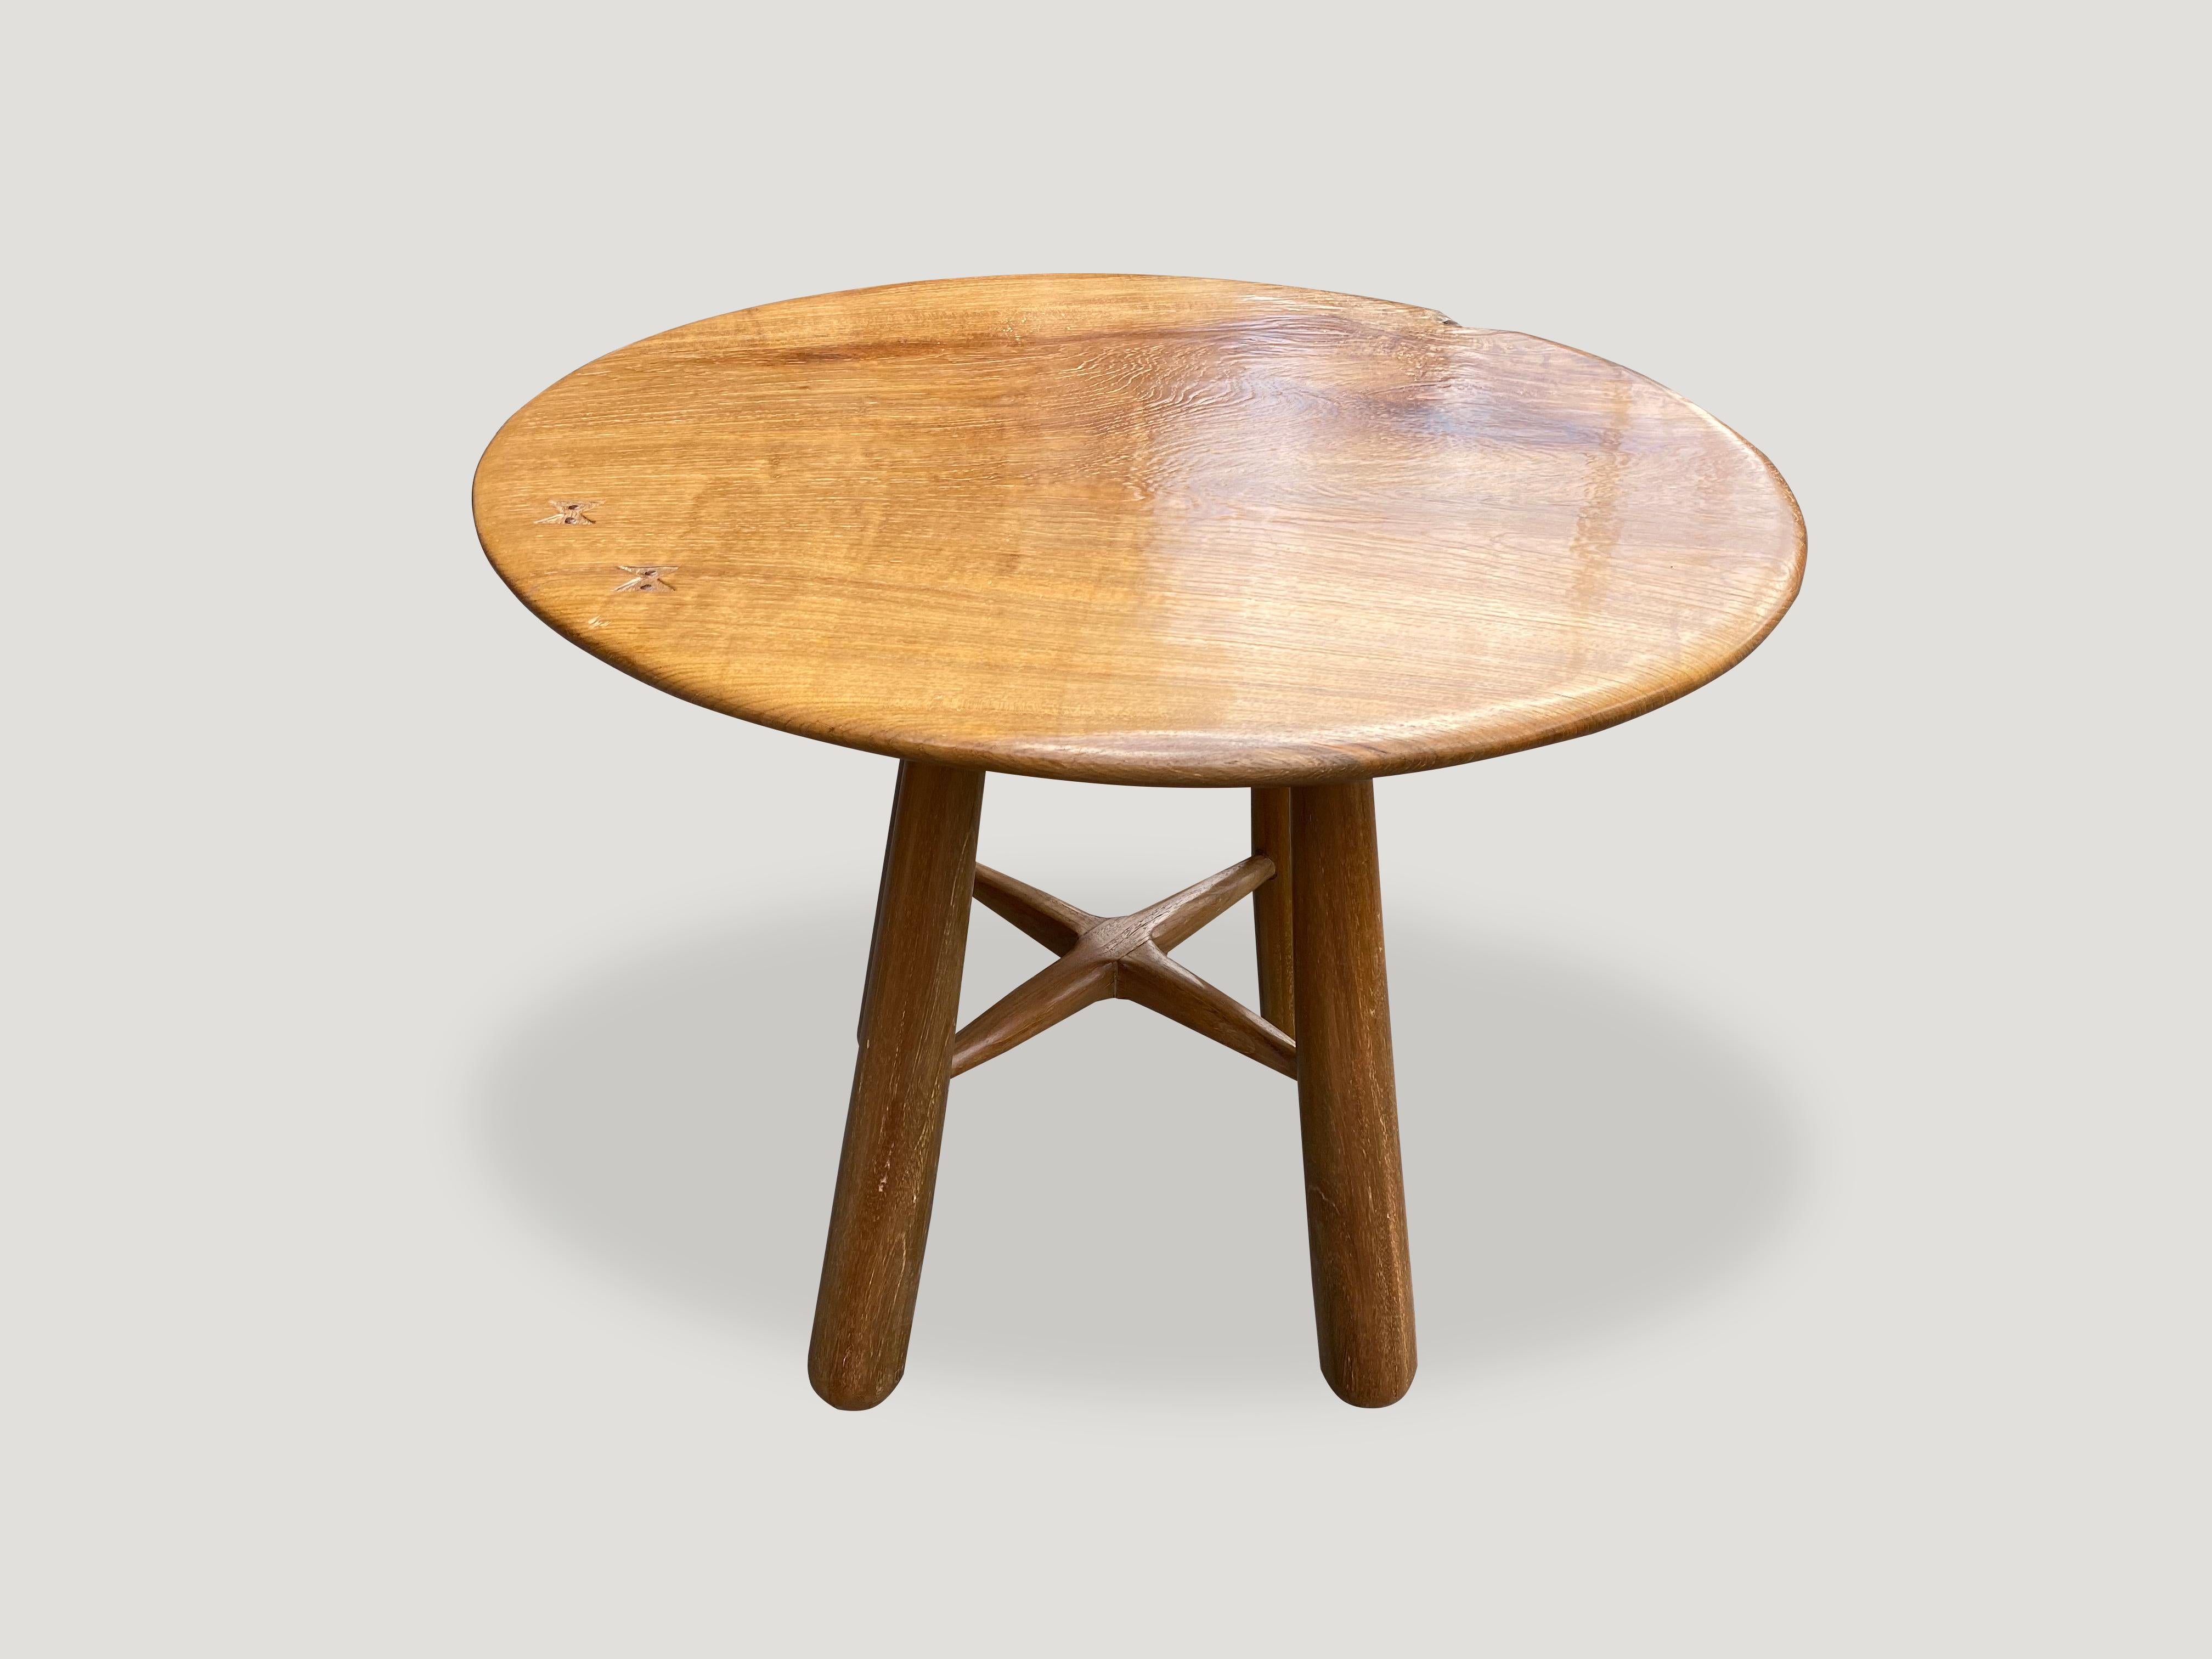 Andrianna Shamaris Midcentury Couture Round Teak Table with Butterflies Inlaid In Excellent Condition For Sale In New York, NY